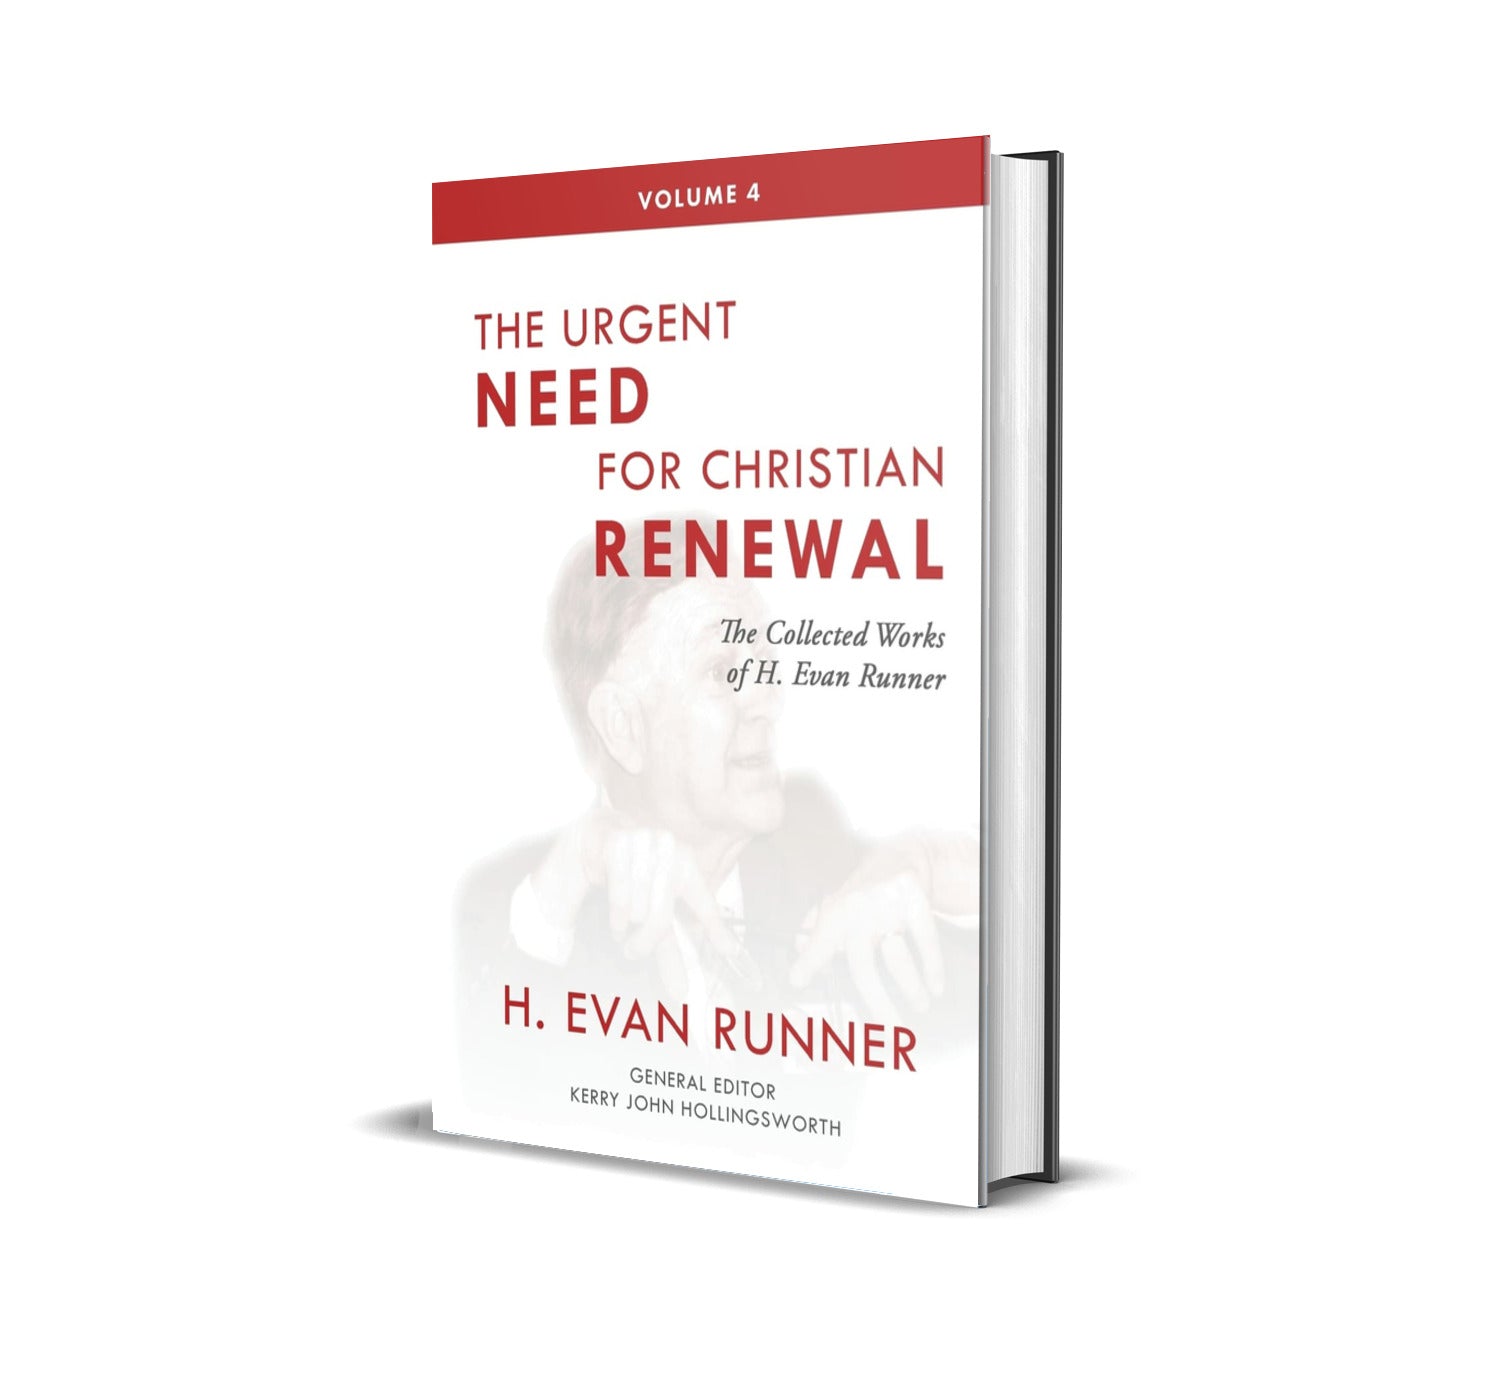 The Collected Works of H. Evan Runner, Vol. 4: The Urgent Need for Christian Renewal (Hardcover)